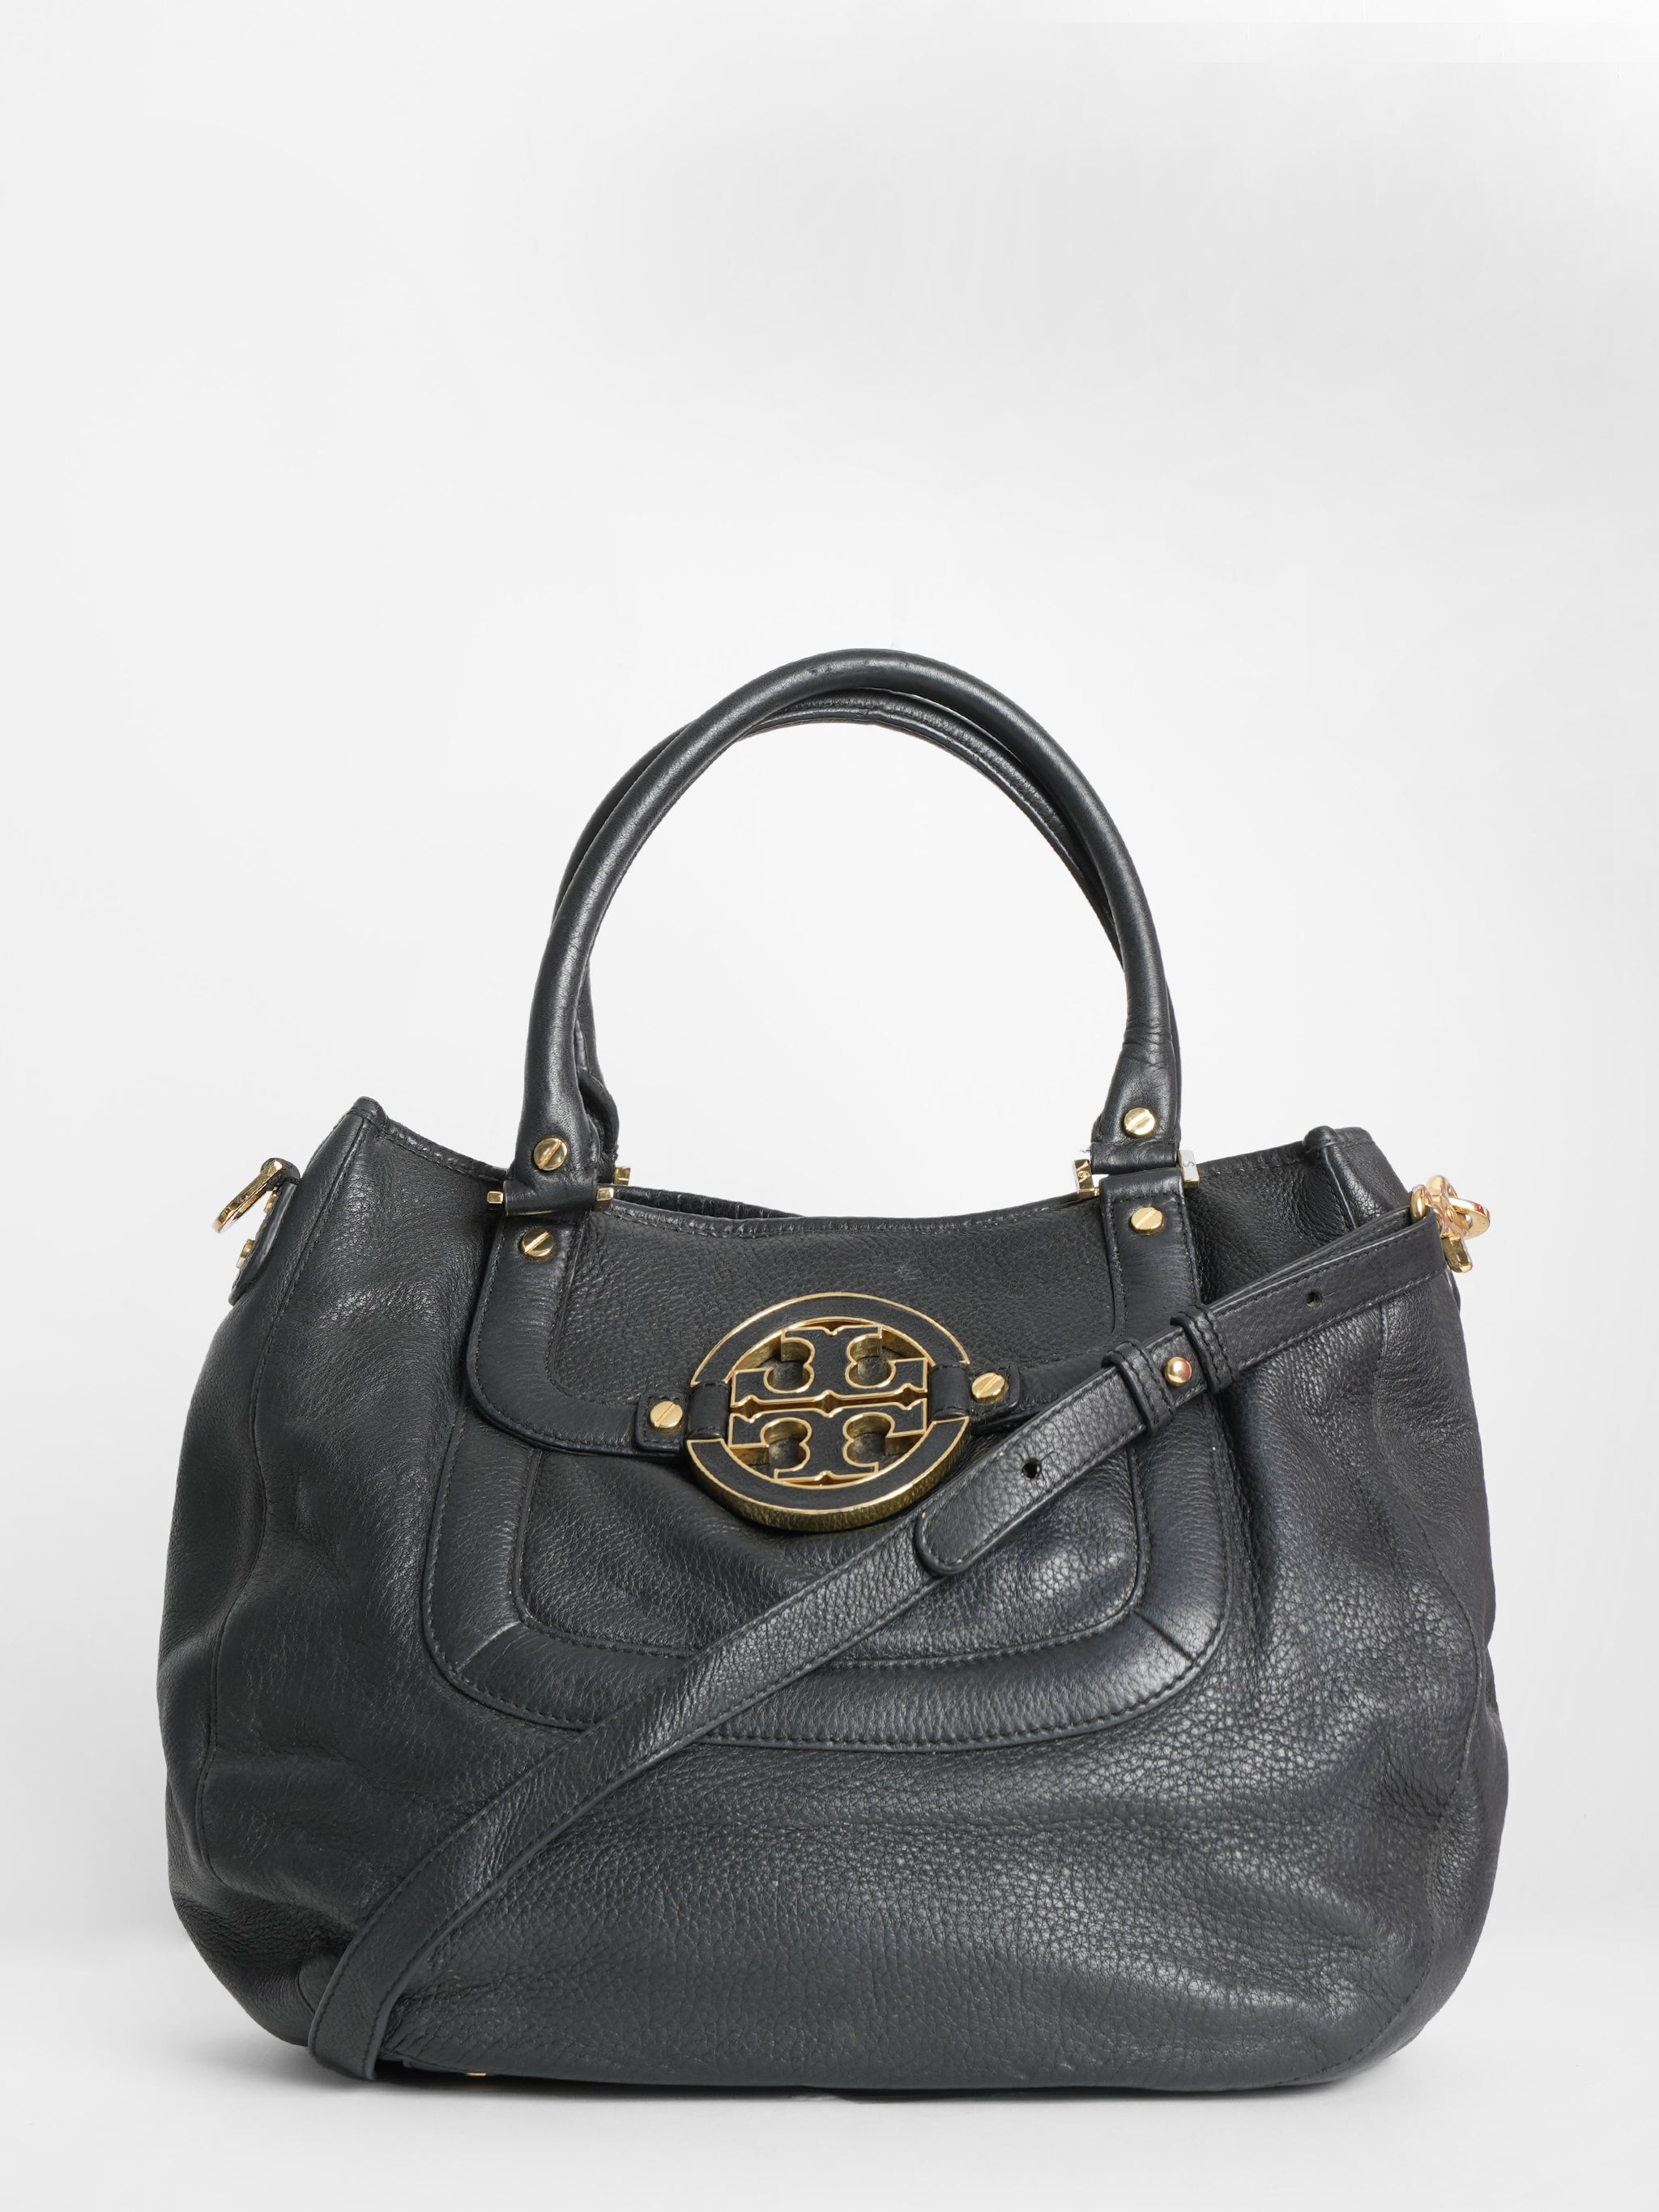 Tory Burch Grained Leather Amanda Tote